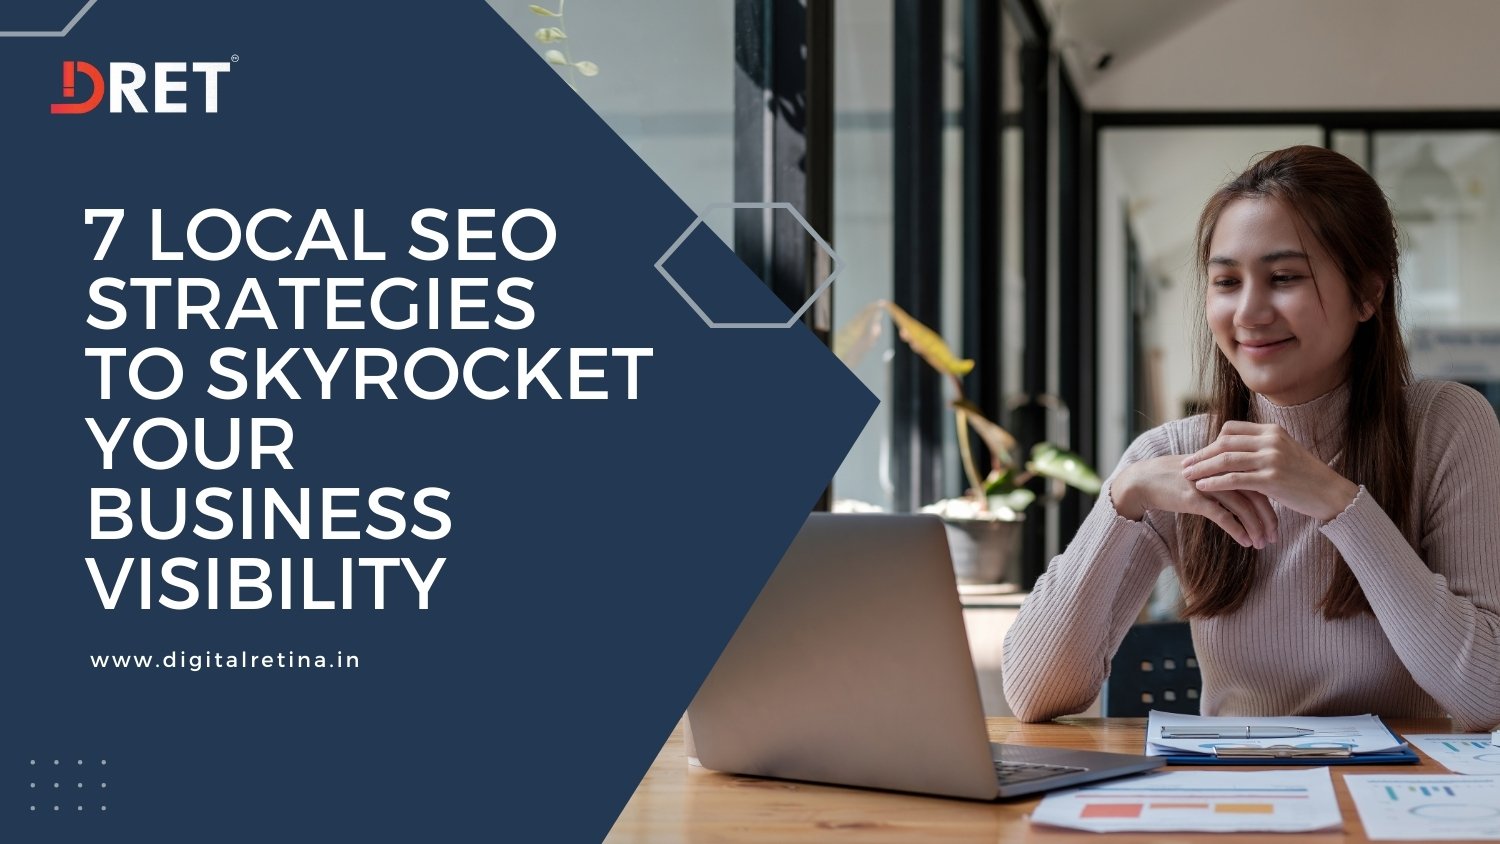 Local SEO Strategies to Skyrocket Your Business Visibility